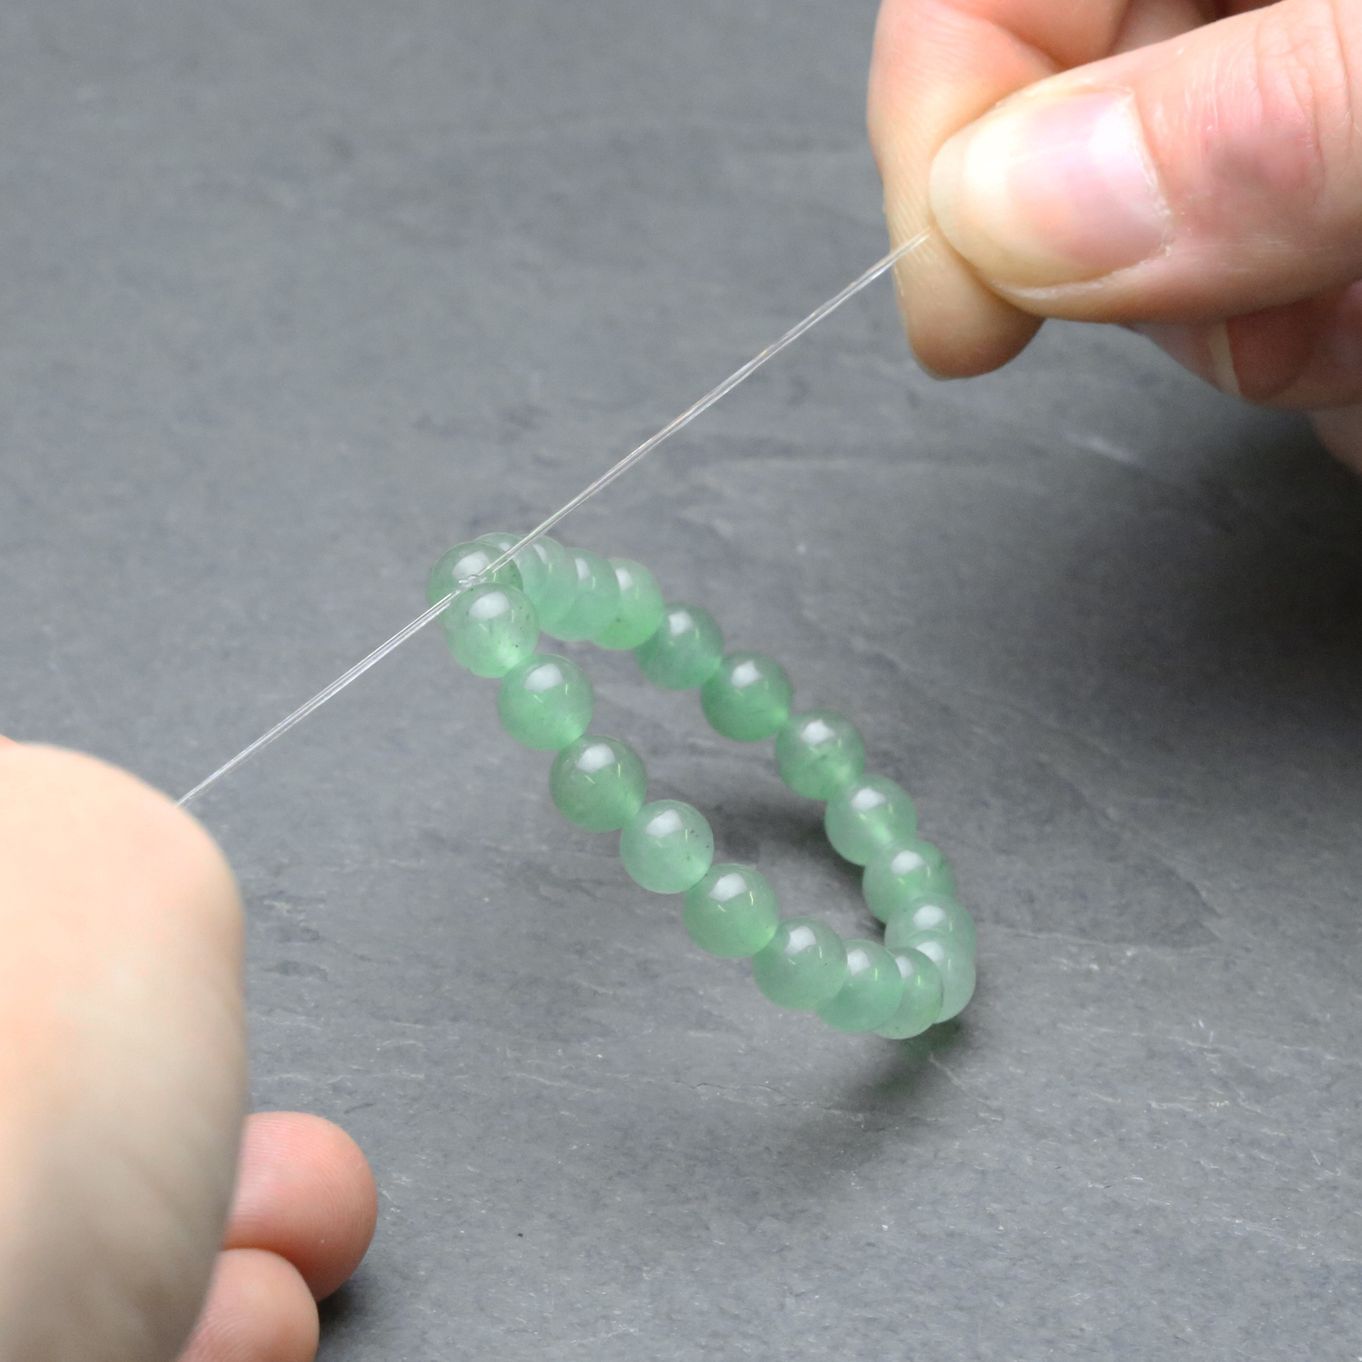 How to knot elastic beading thread securely 